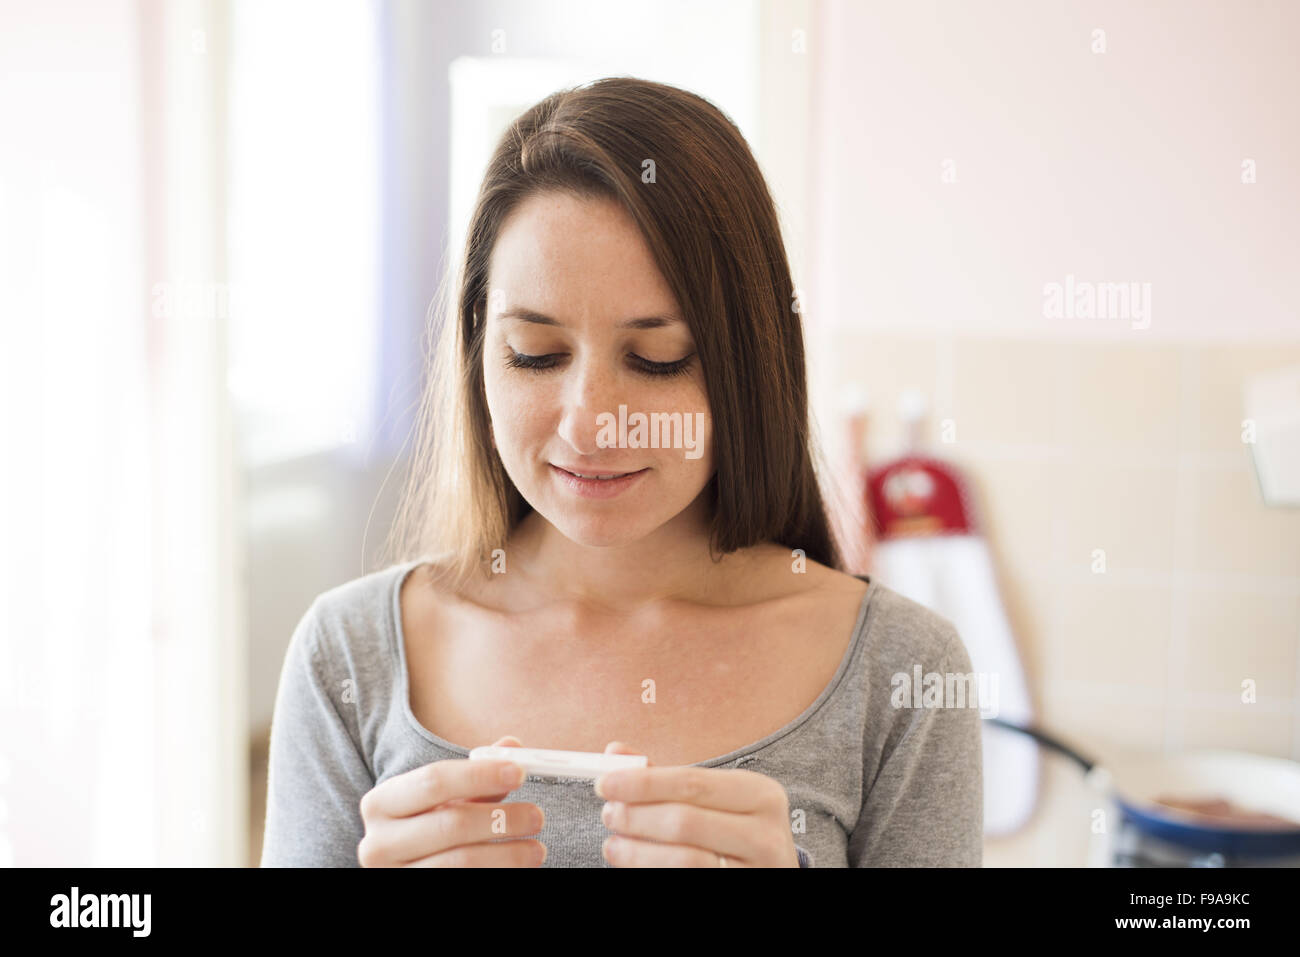 Happy woman with positive pregnancy test result. She is excited at home. Stock Photo